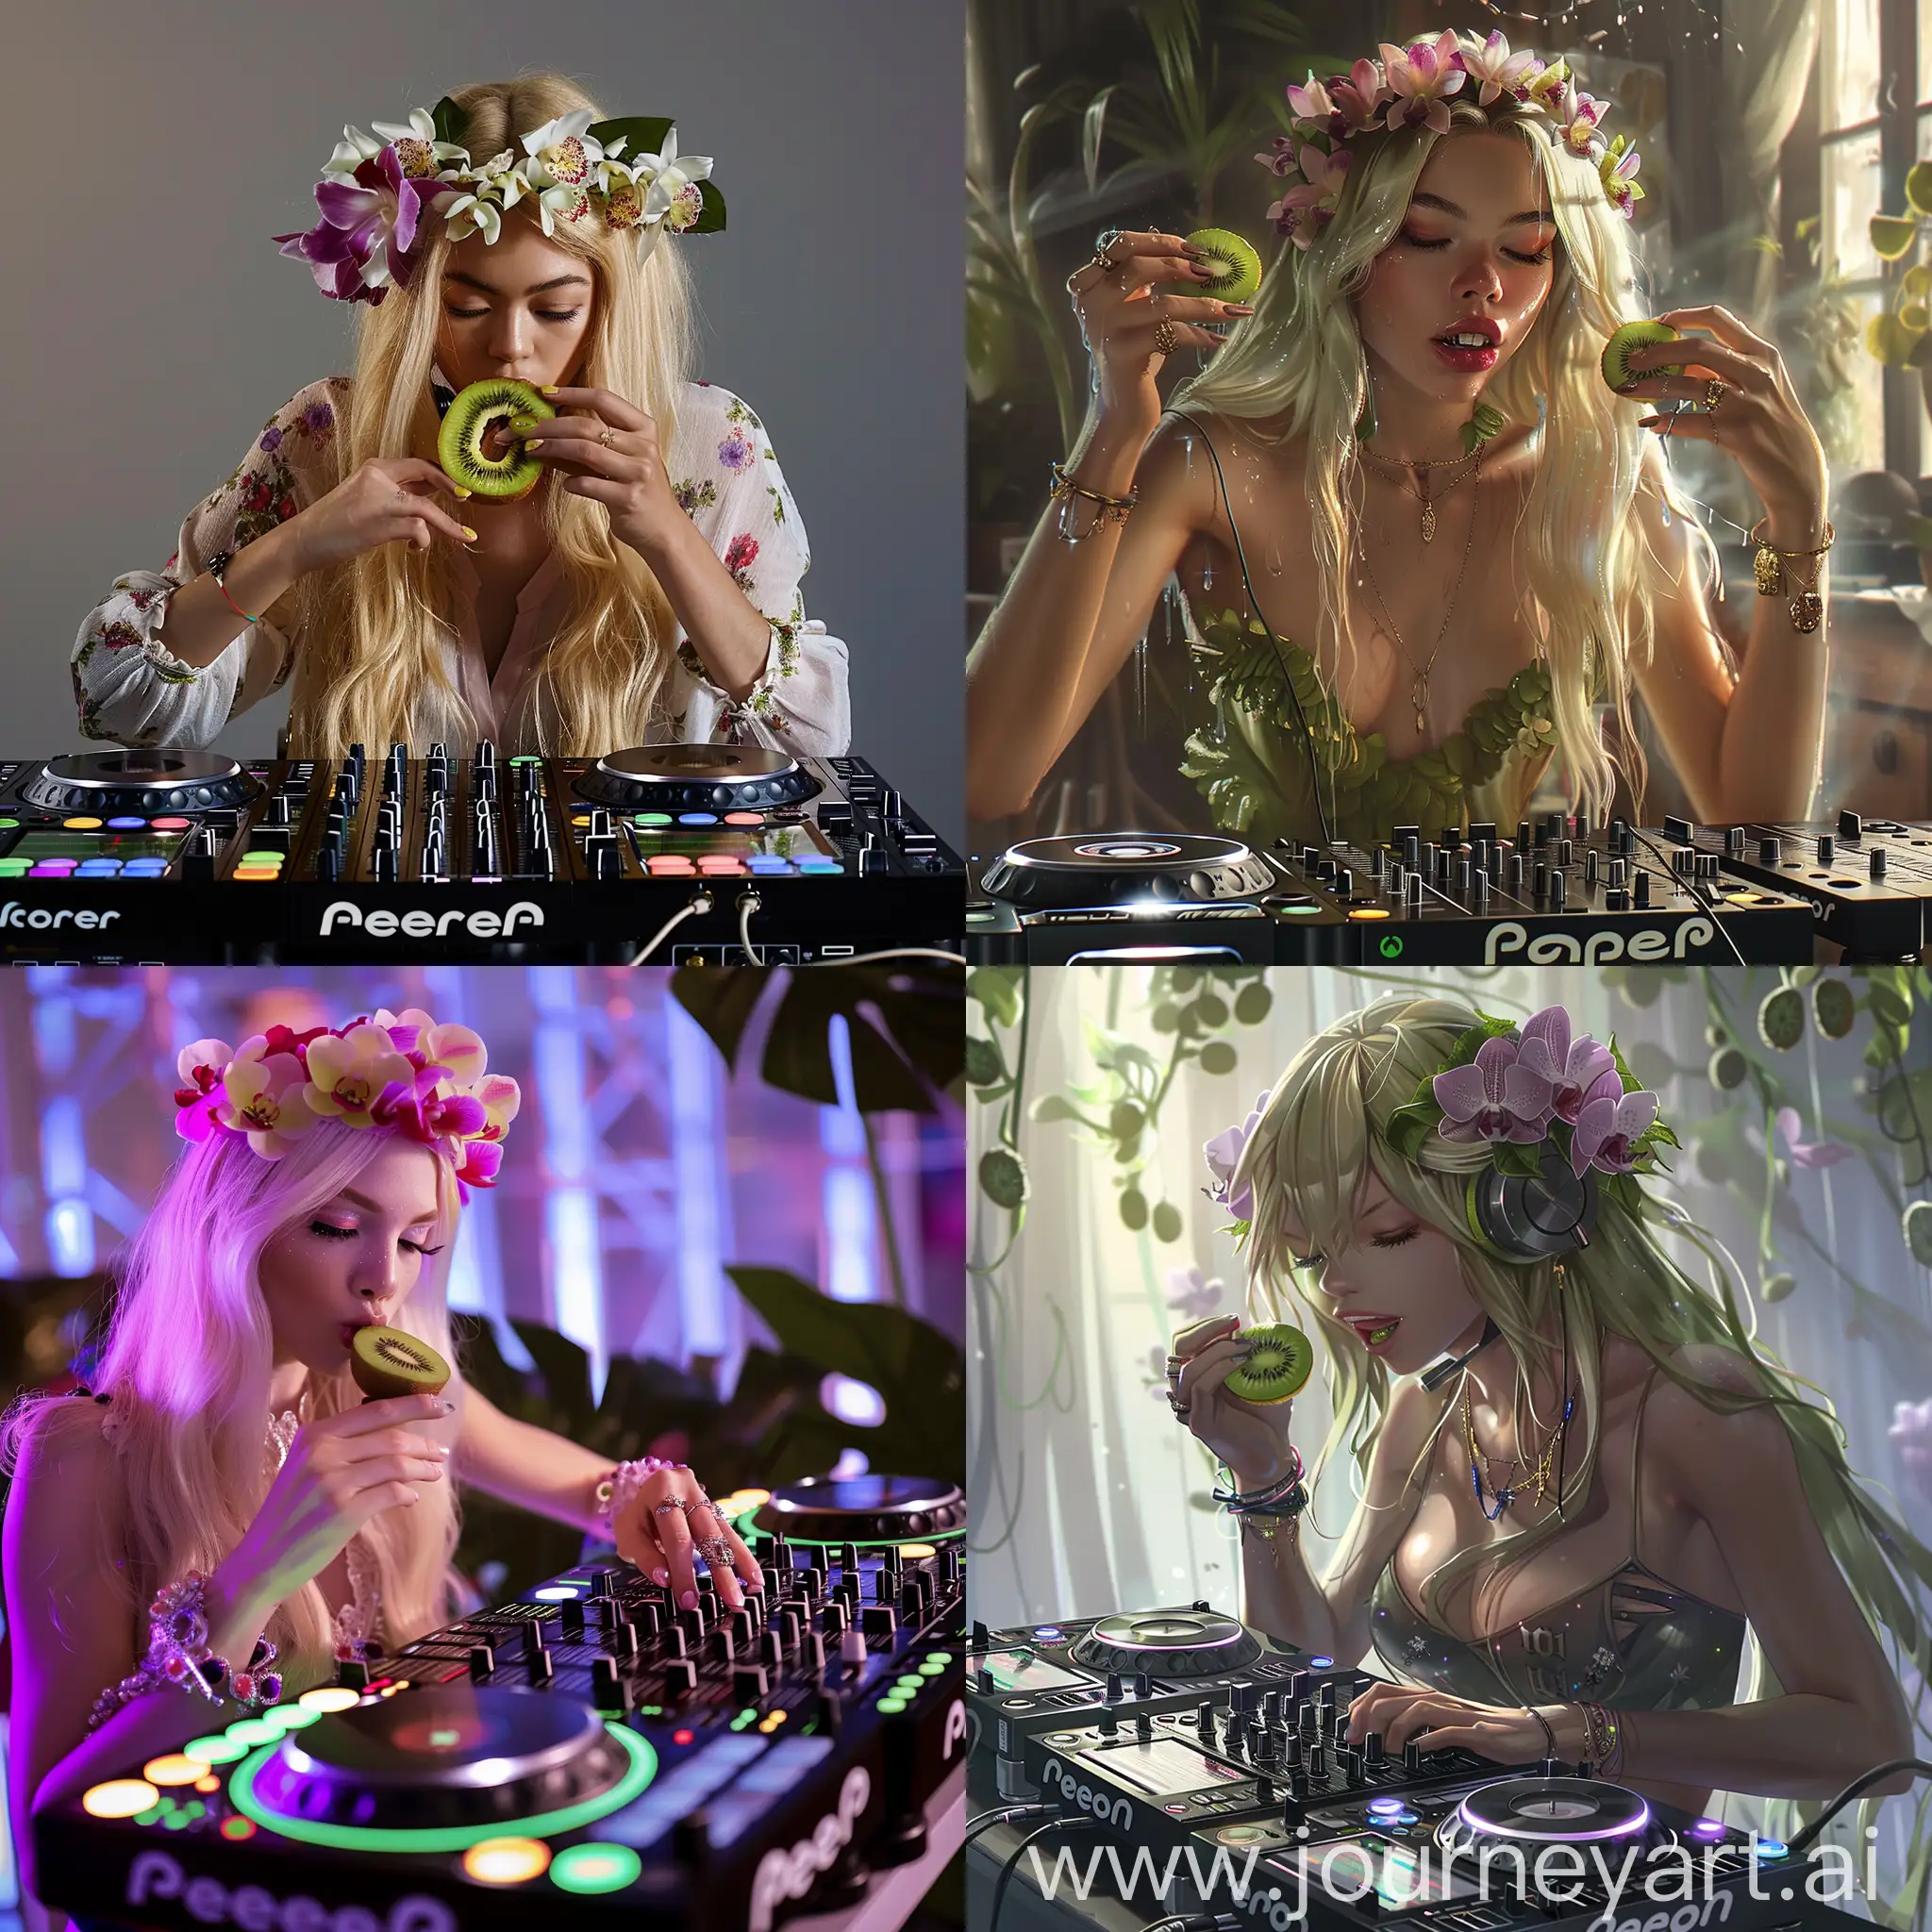 Blonde-DJ-Girl-with-Orchids-Enjoying-Kiwi-and-Mixing-Music